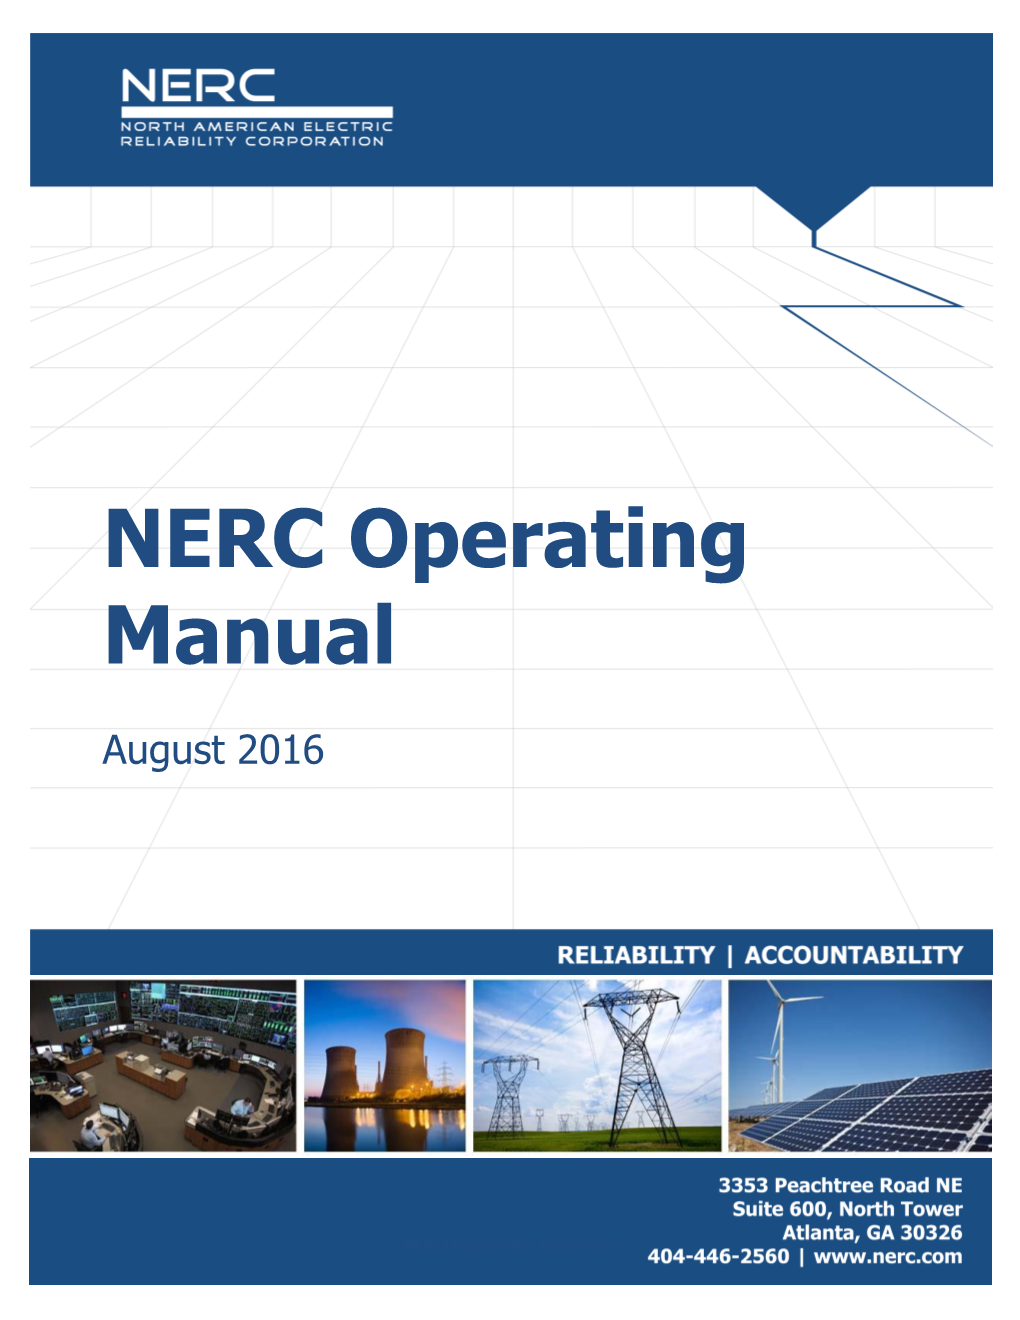 A History of NERC